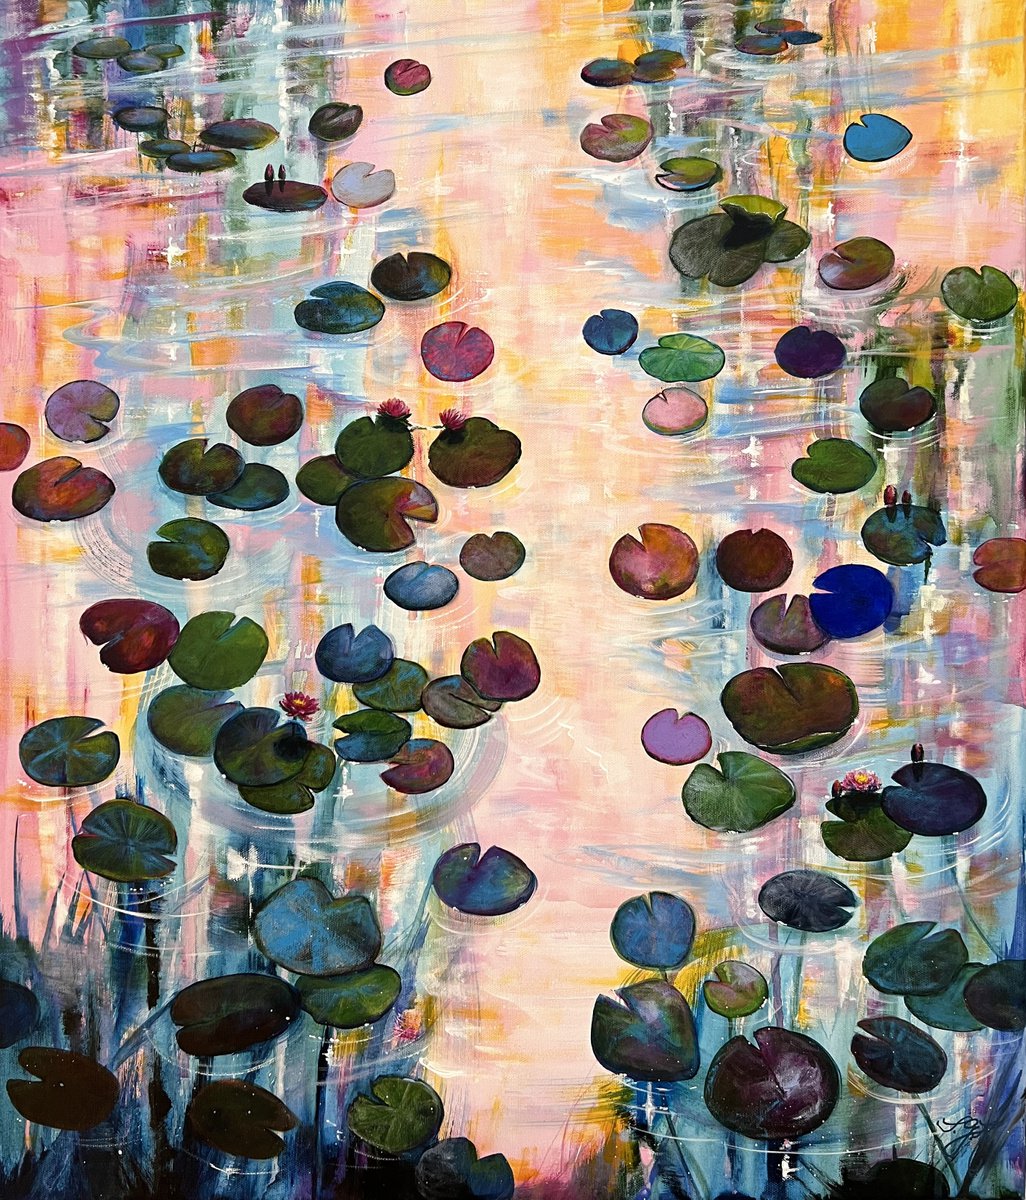 Water Lilies At Sunset 9 by Sandra Gebhardt-Hoepfner